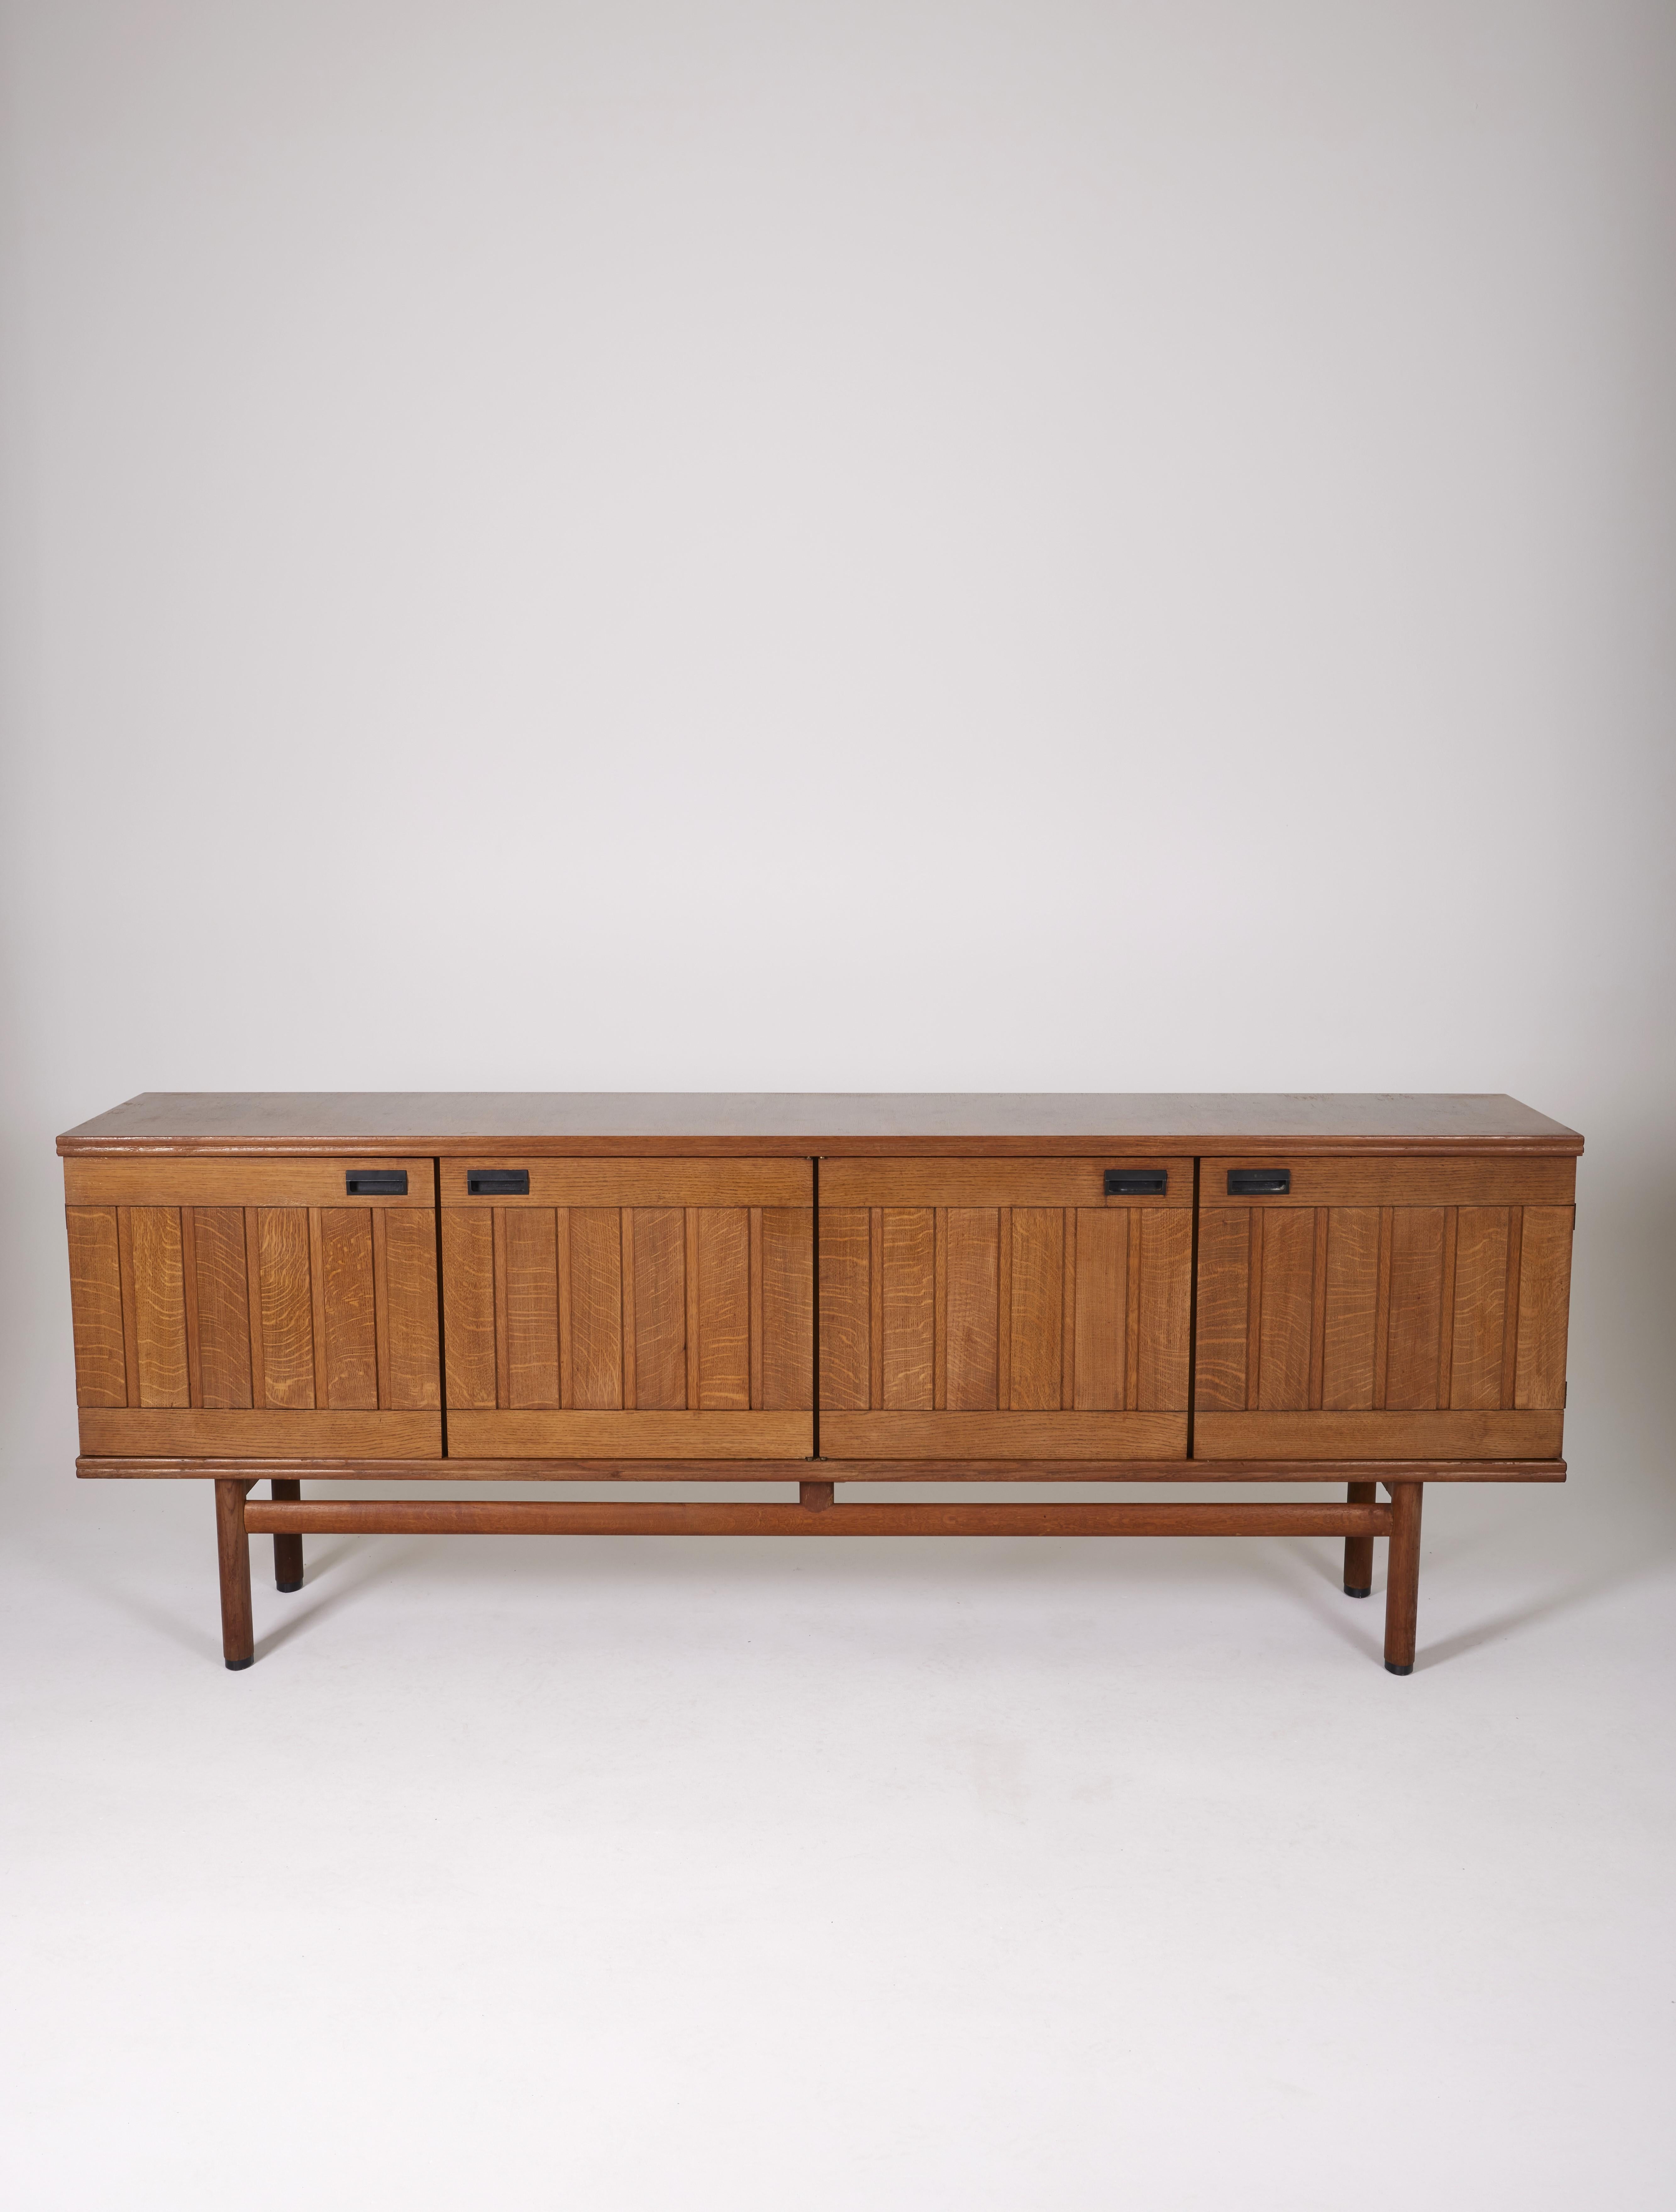 Sideboard by Pierre Gautier-Delaye, France 1950s. Composed of 4 doors, a base with brace and handles in black lacquered aluminum. Very good condition, some traces of use.